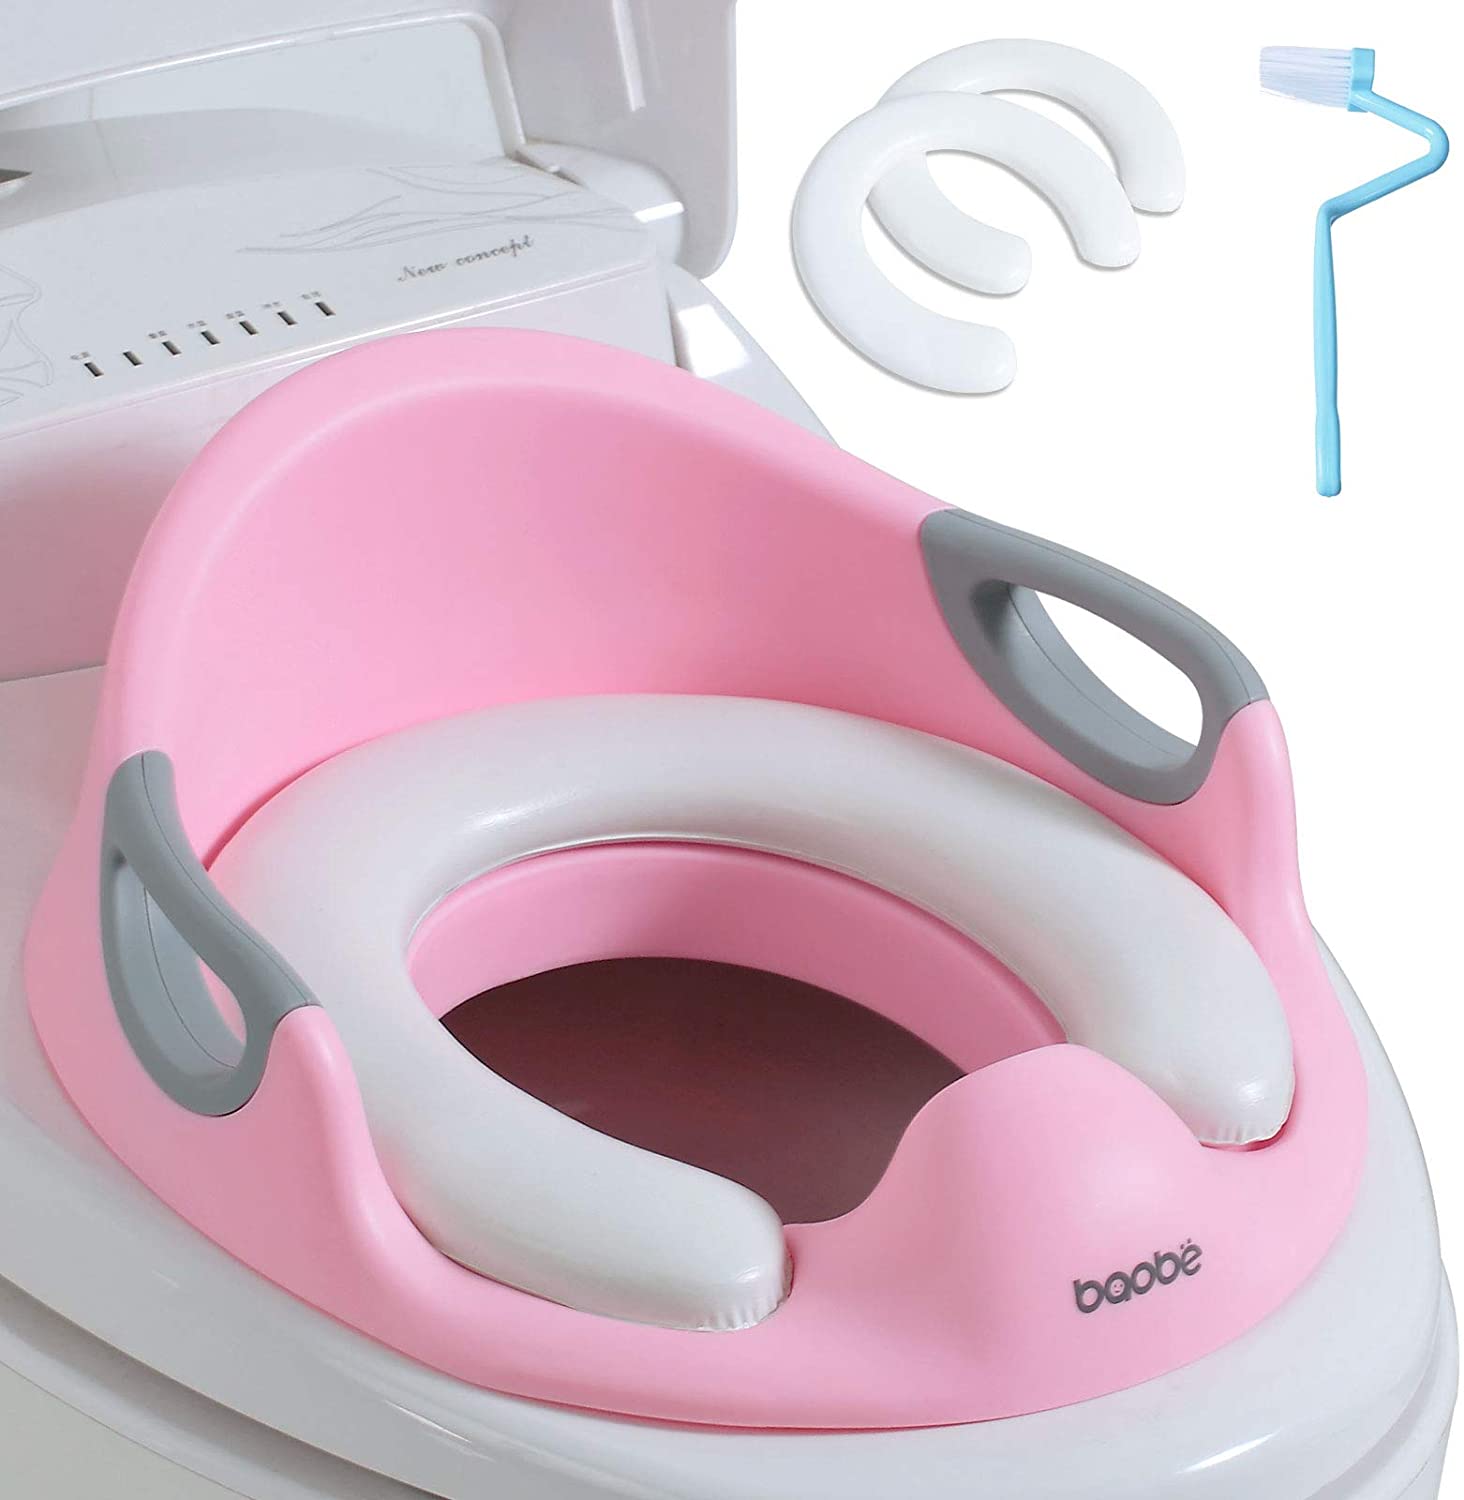 100% Original Bottle Feeding Newborn - Potty Training Seat for Kids Toddlers, Toilet Seat for Baby with Cushion Handle and Backrest, Toilet Trainer for Round and Oval Toilets (Pink) – Ealing